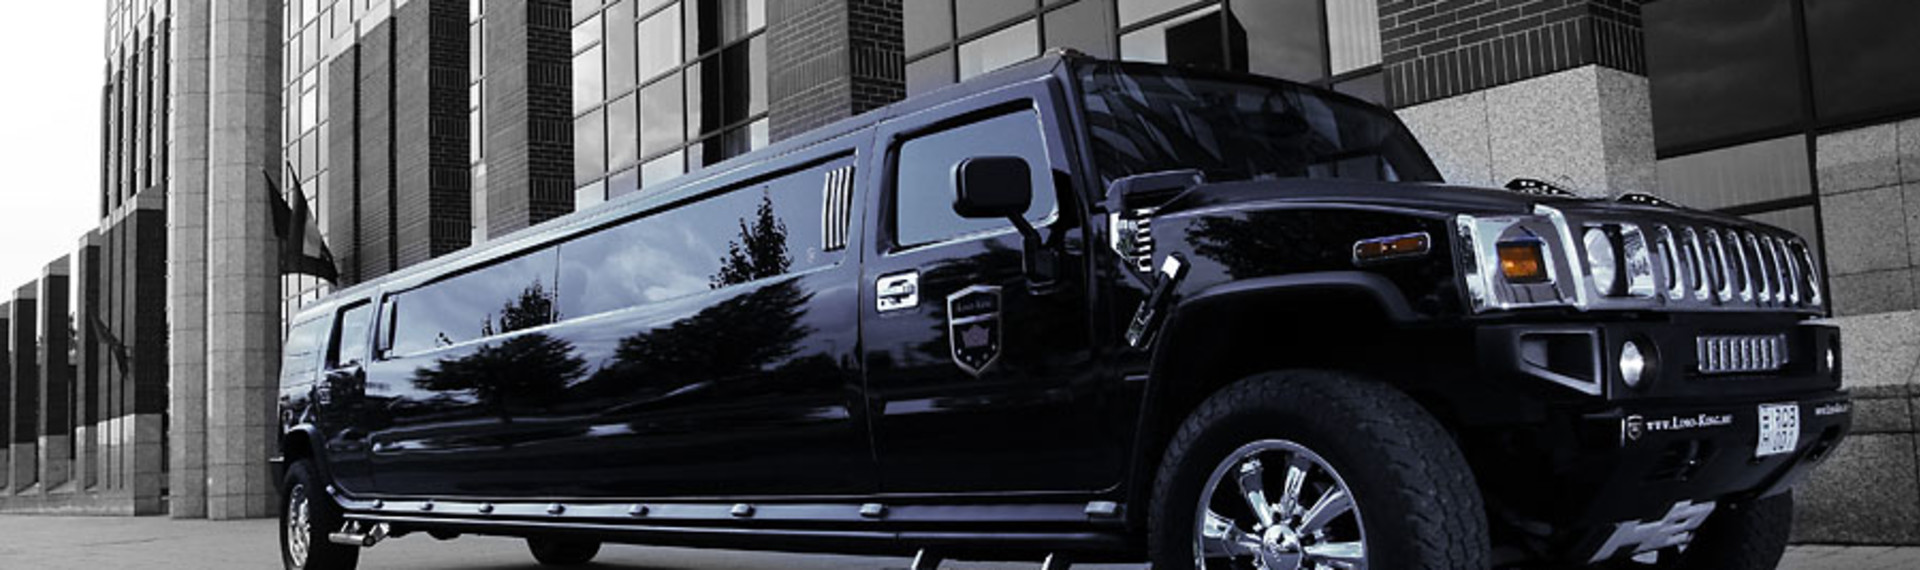 Hummer Limousine Hire in Budapest | Pissup Tours